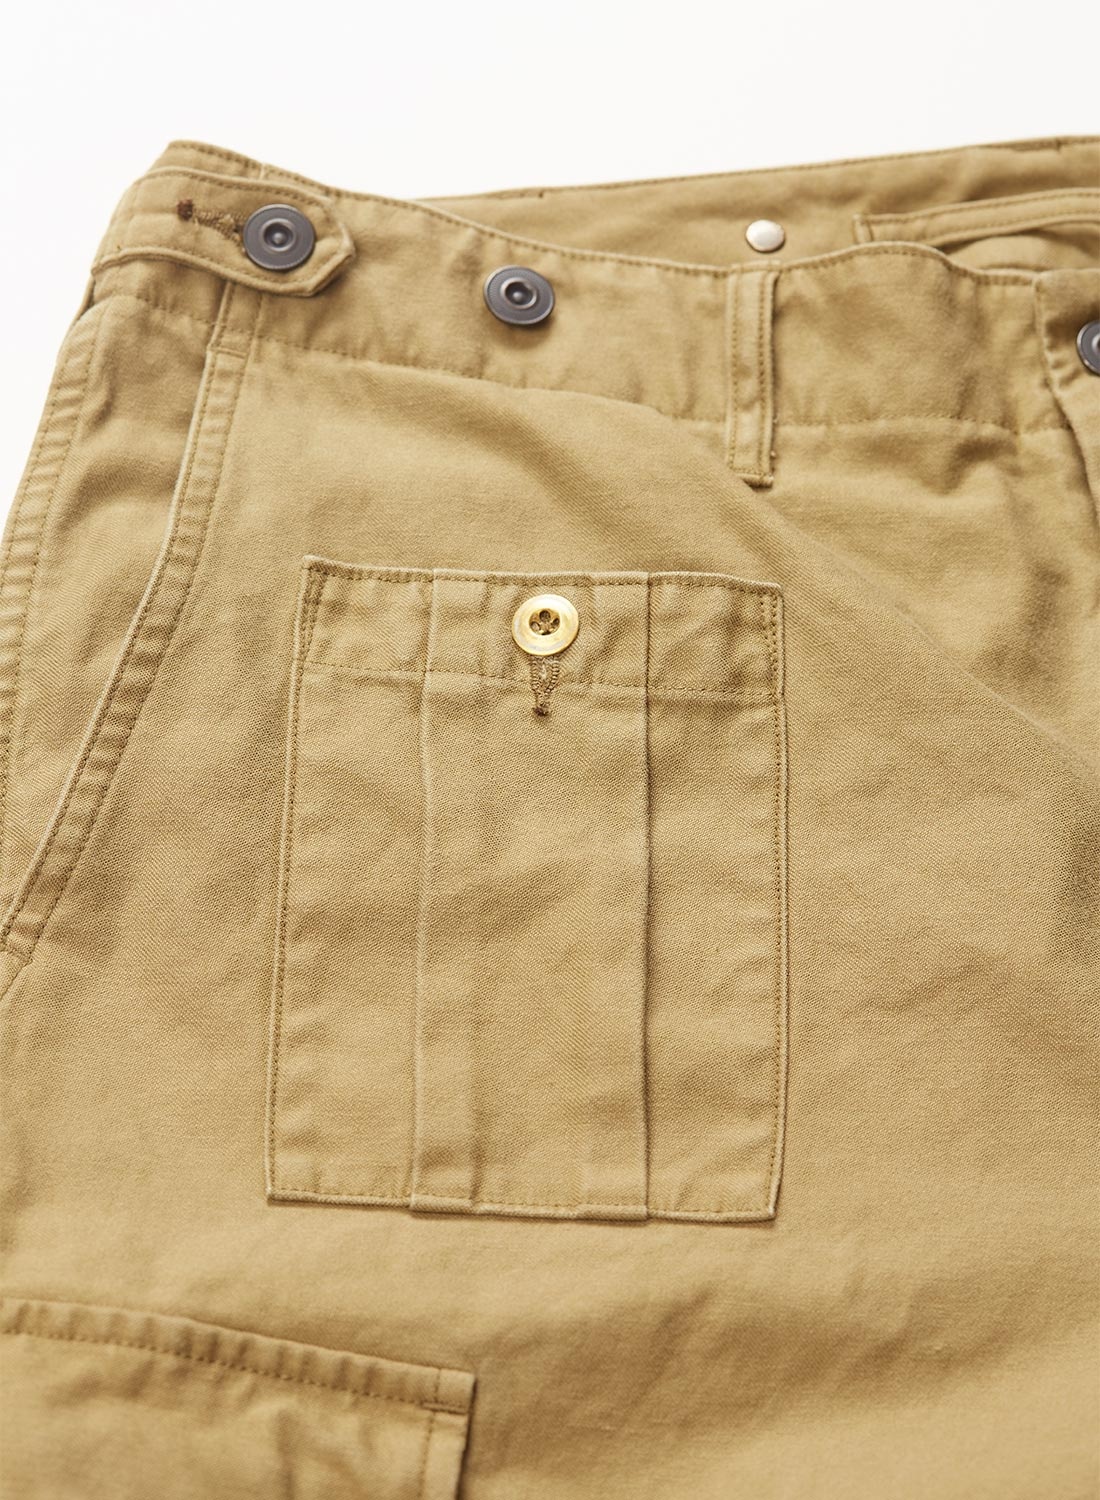 Nigel Cabourn Army Cargo Pant in Khaki   cabourn   REVERSIBLE